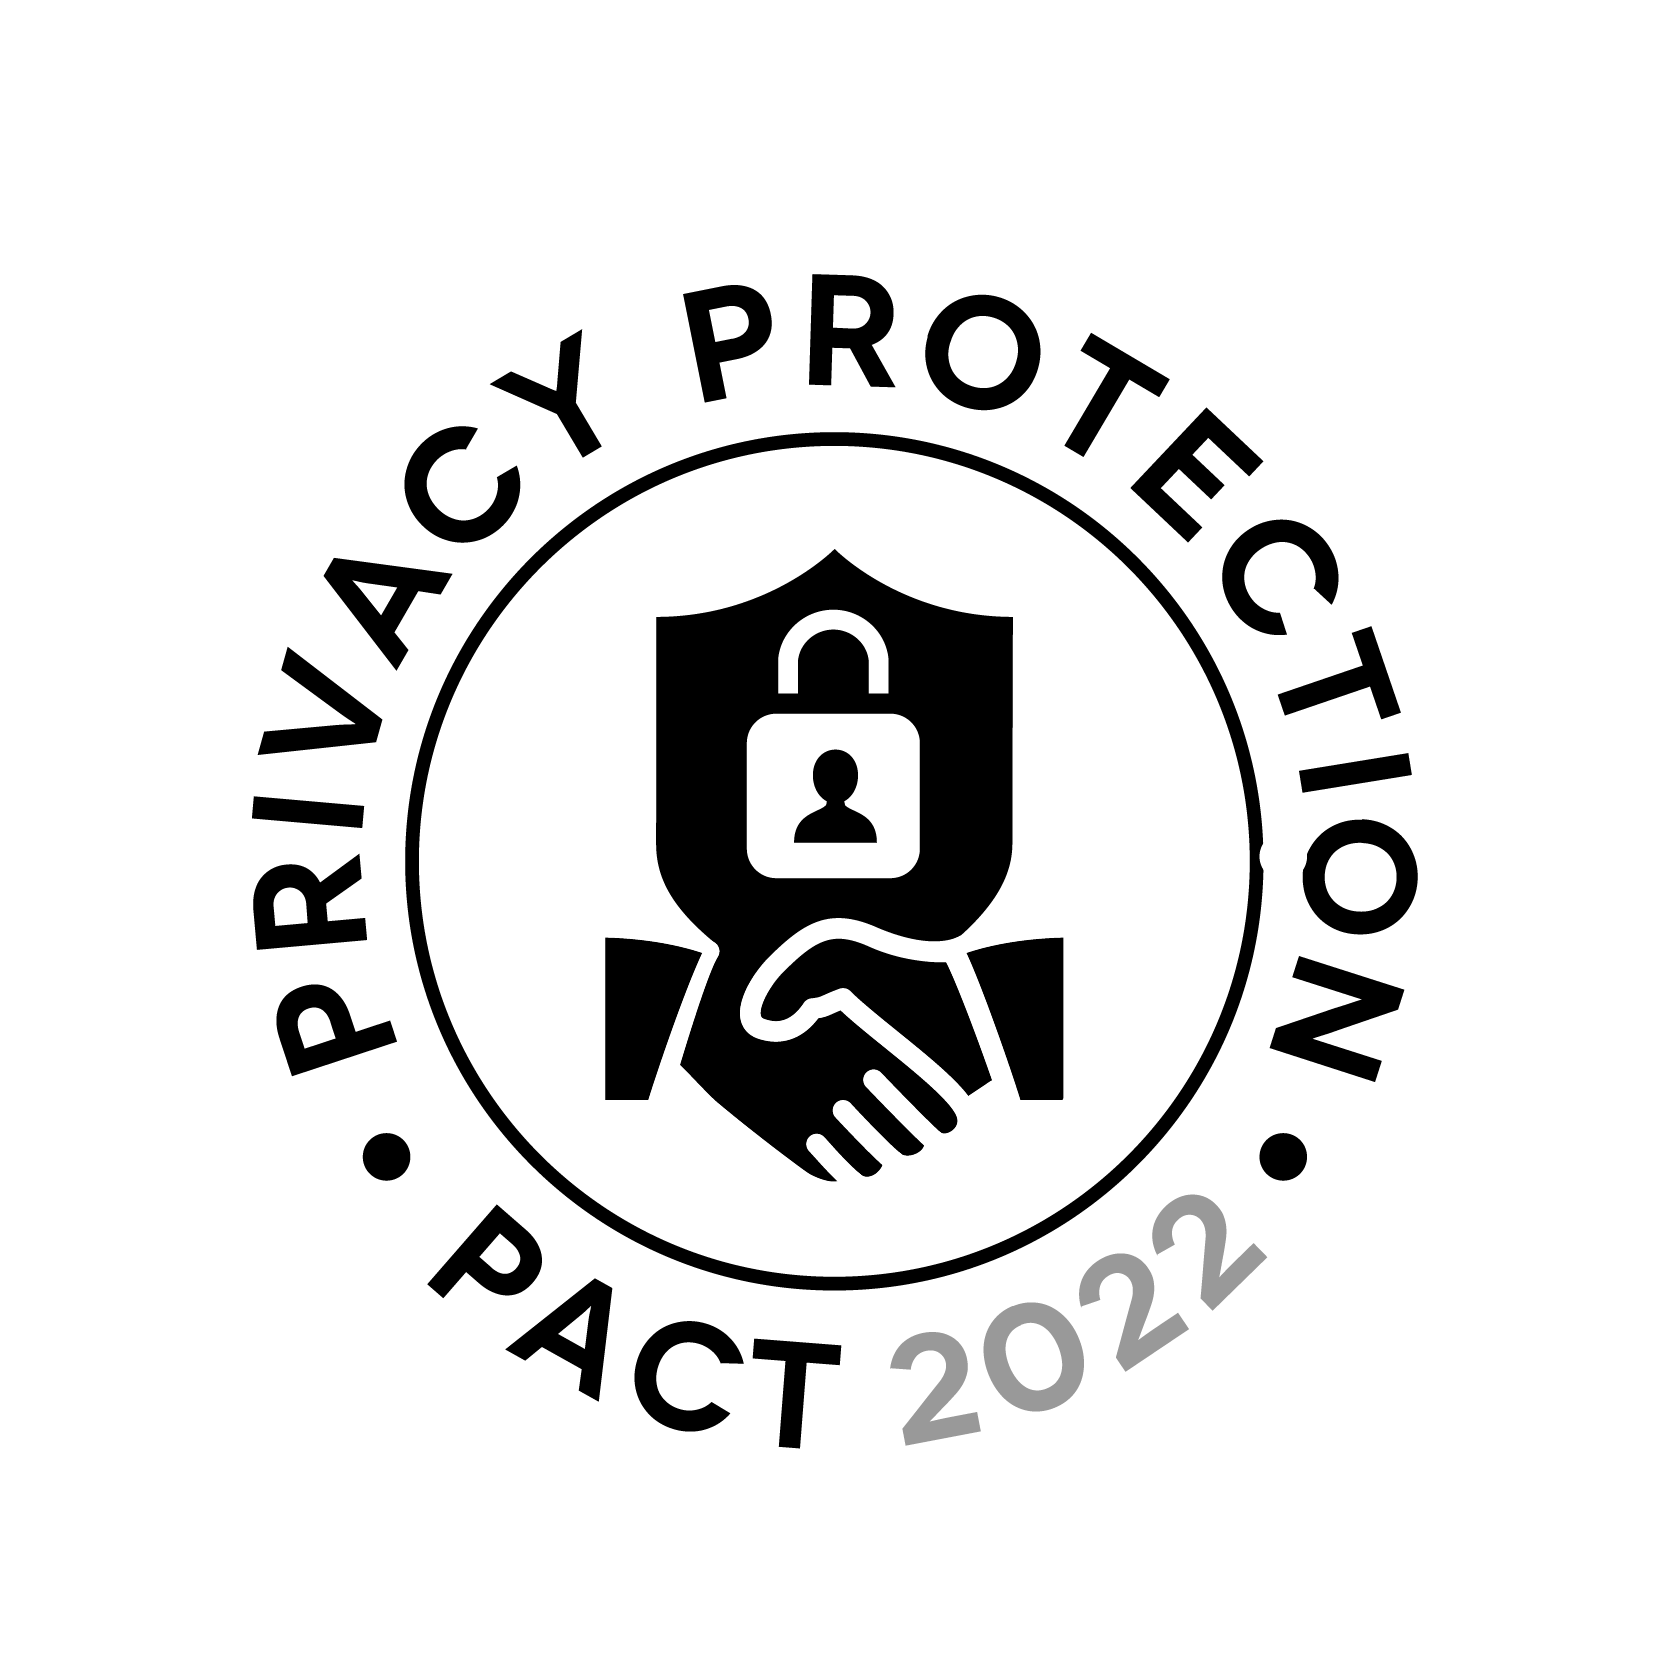 rgpd-privacy-protection